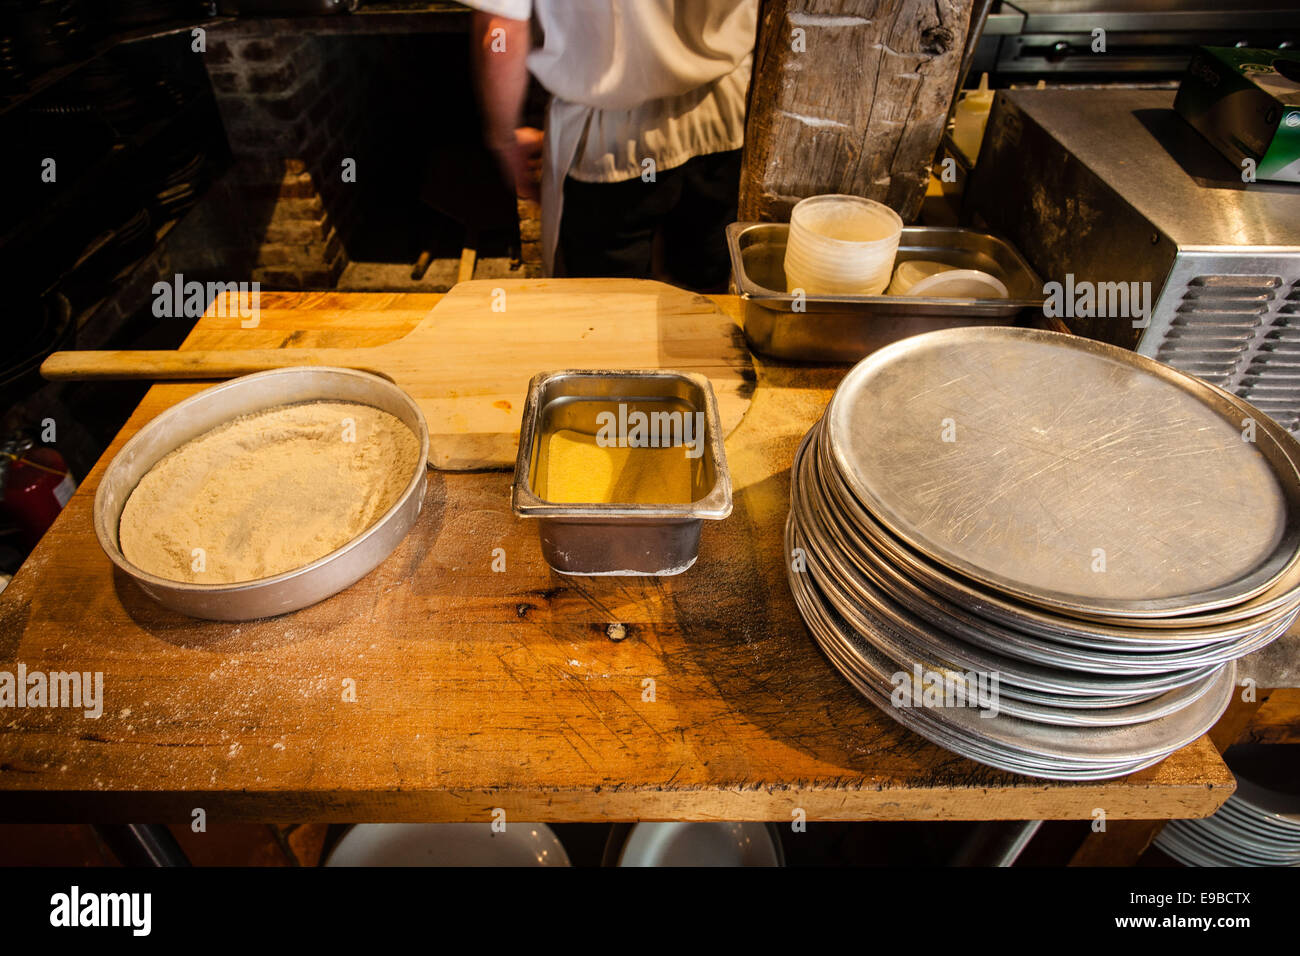 Work table of a pizza maker in front of brick oven showing pizza ingredients and tools. Stock Photo